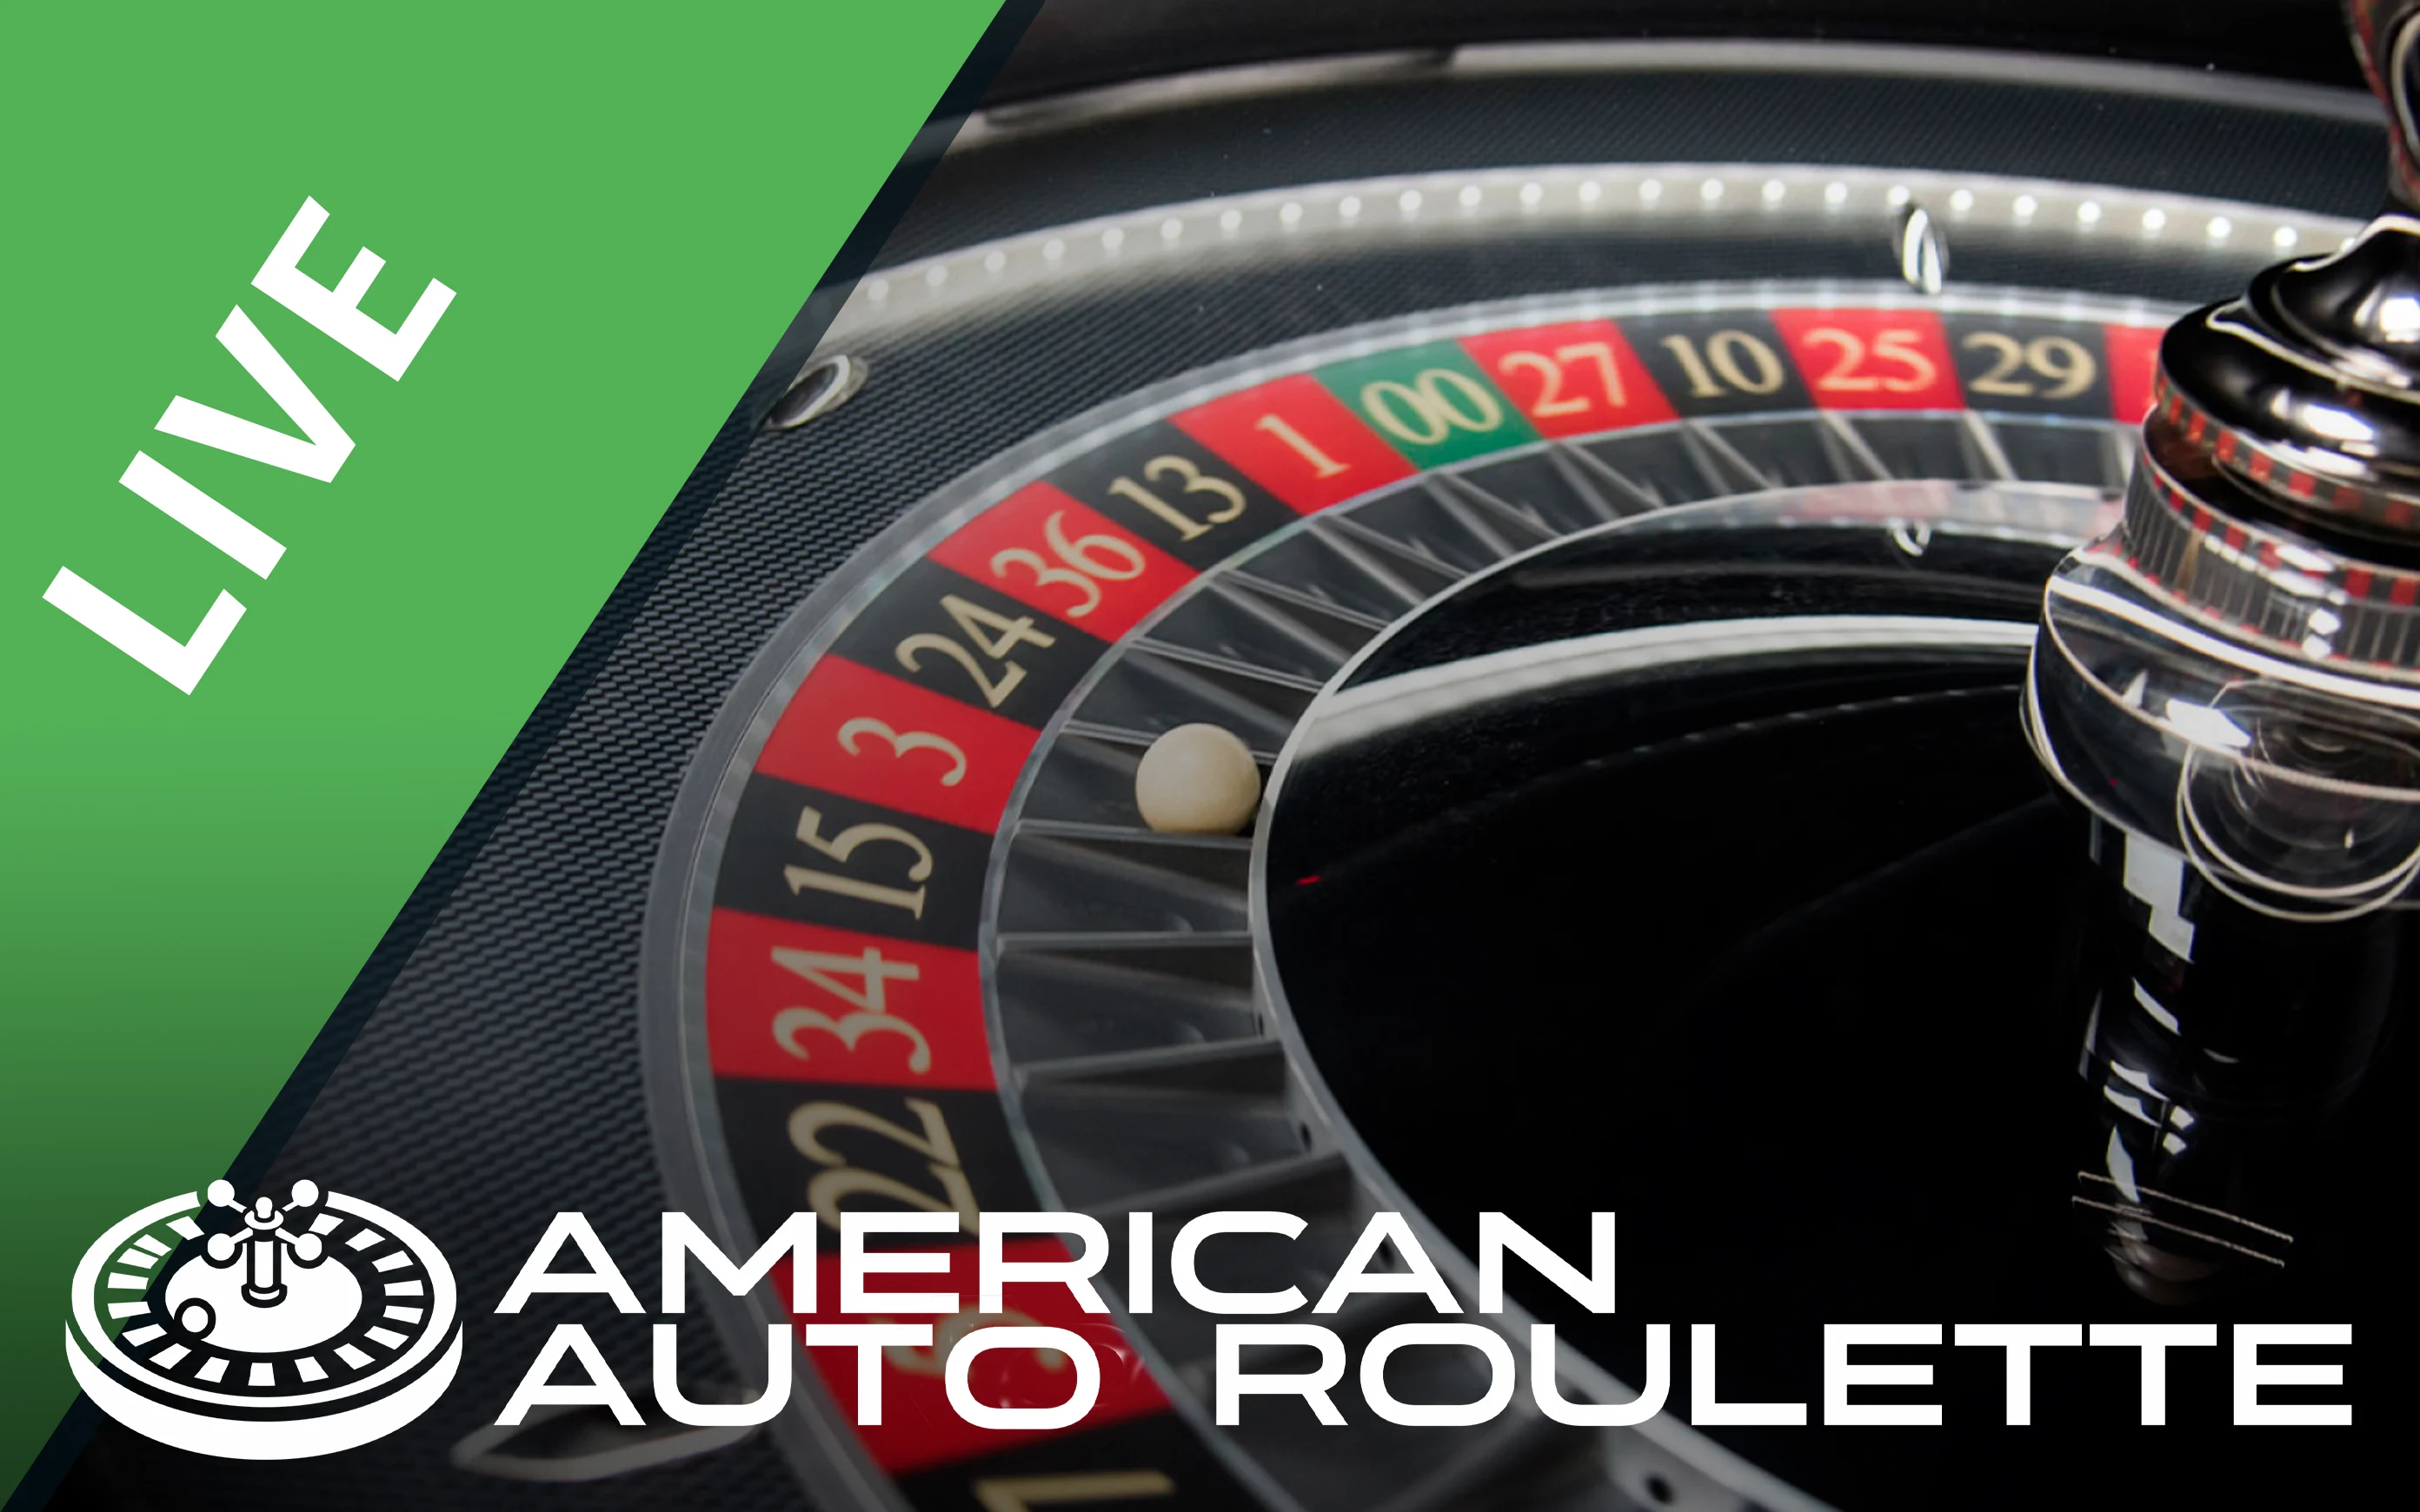 Play American Auto Roulette on Starcasino.be online casino